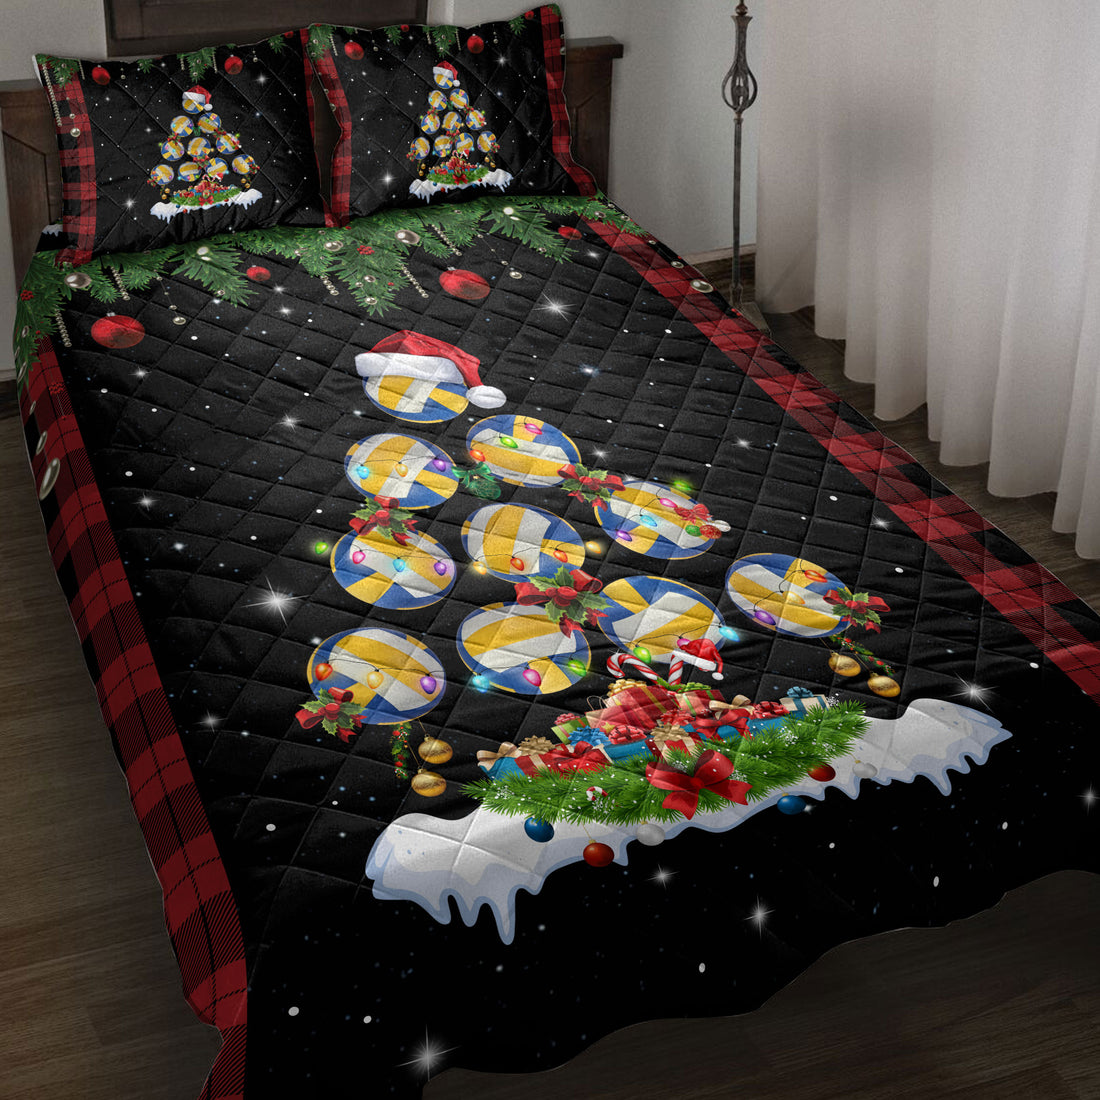 Ohaprints-Quilt-Bed-Set-Pillowcase-Volleyball-Christmas-Tree-Snowflake-Gift-Box-Red-Buffalo-Plaid-Gifts-Blanket-Bedspread-Bedding-3803-Throw (55'' x 60'')